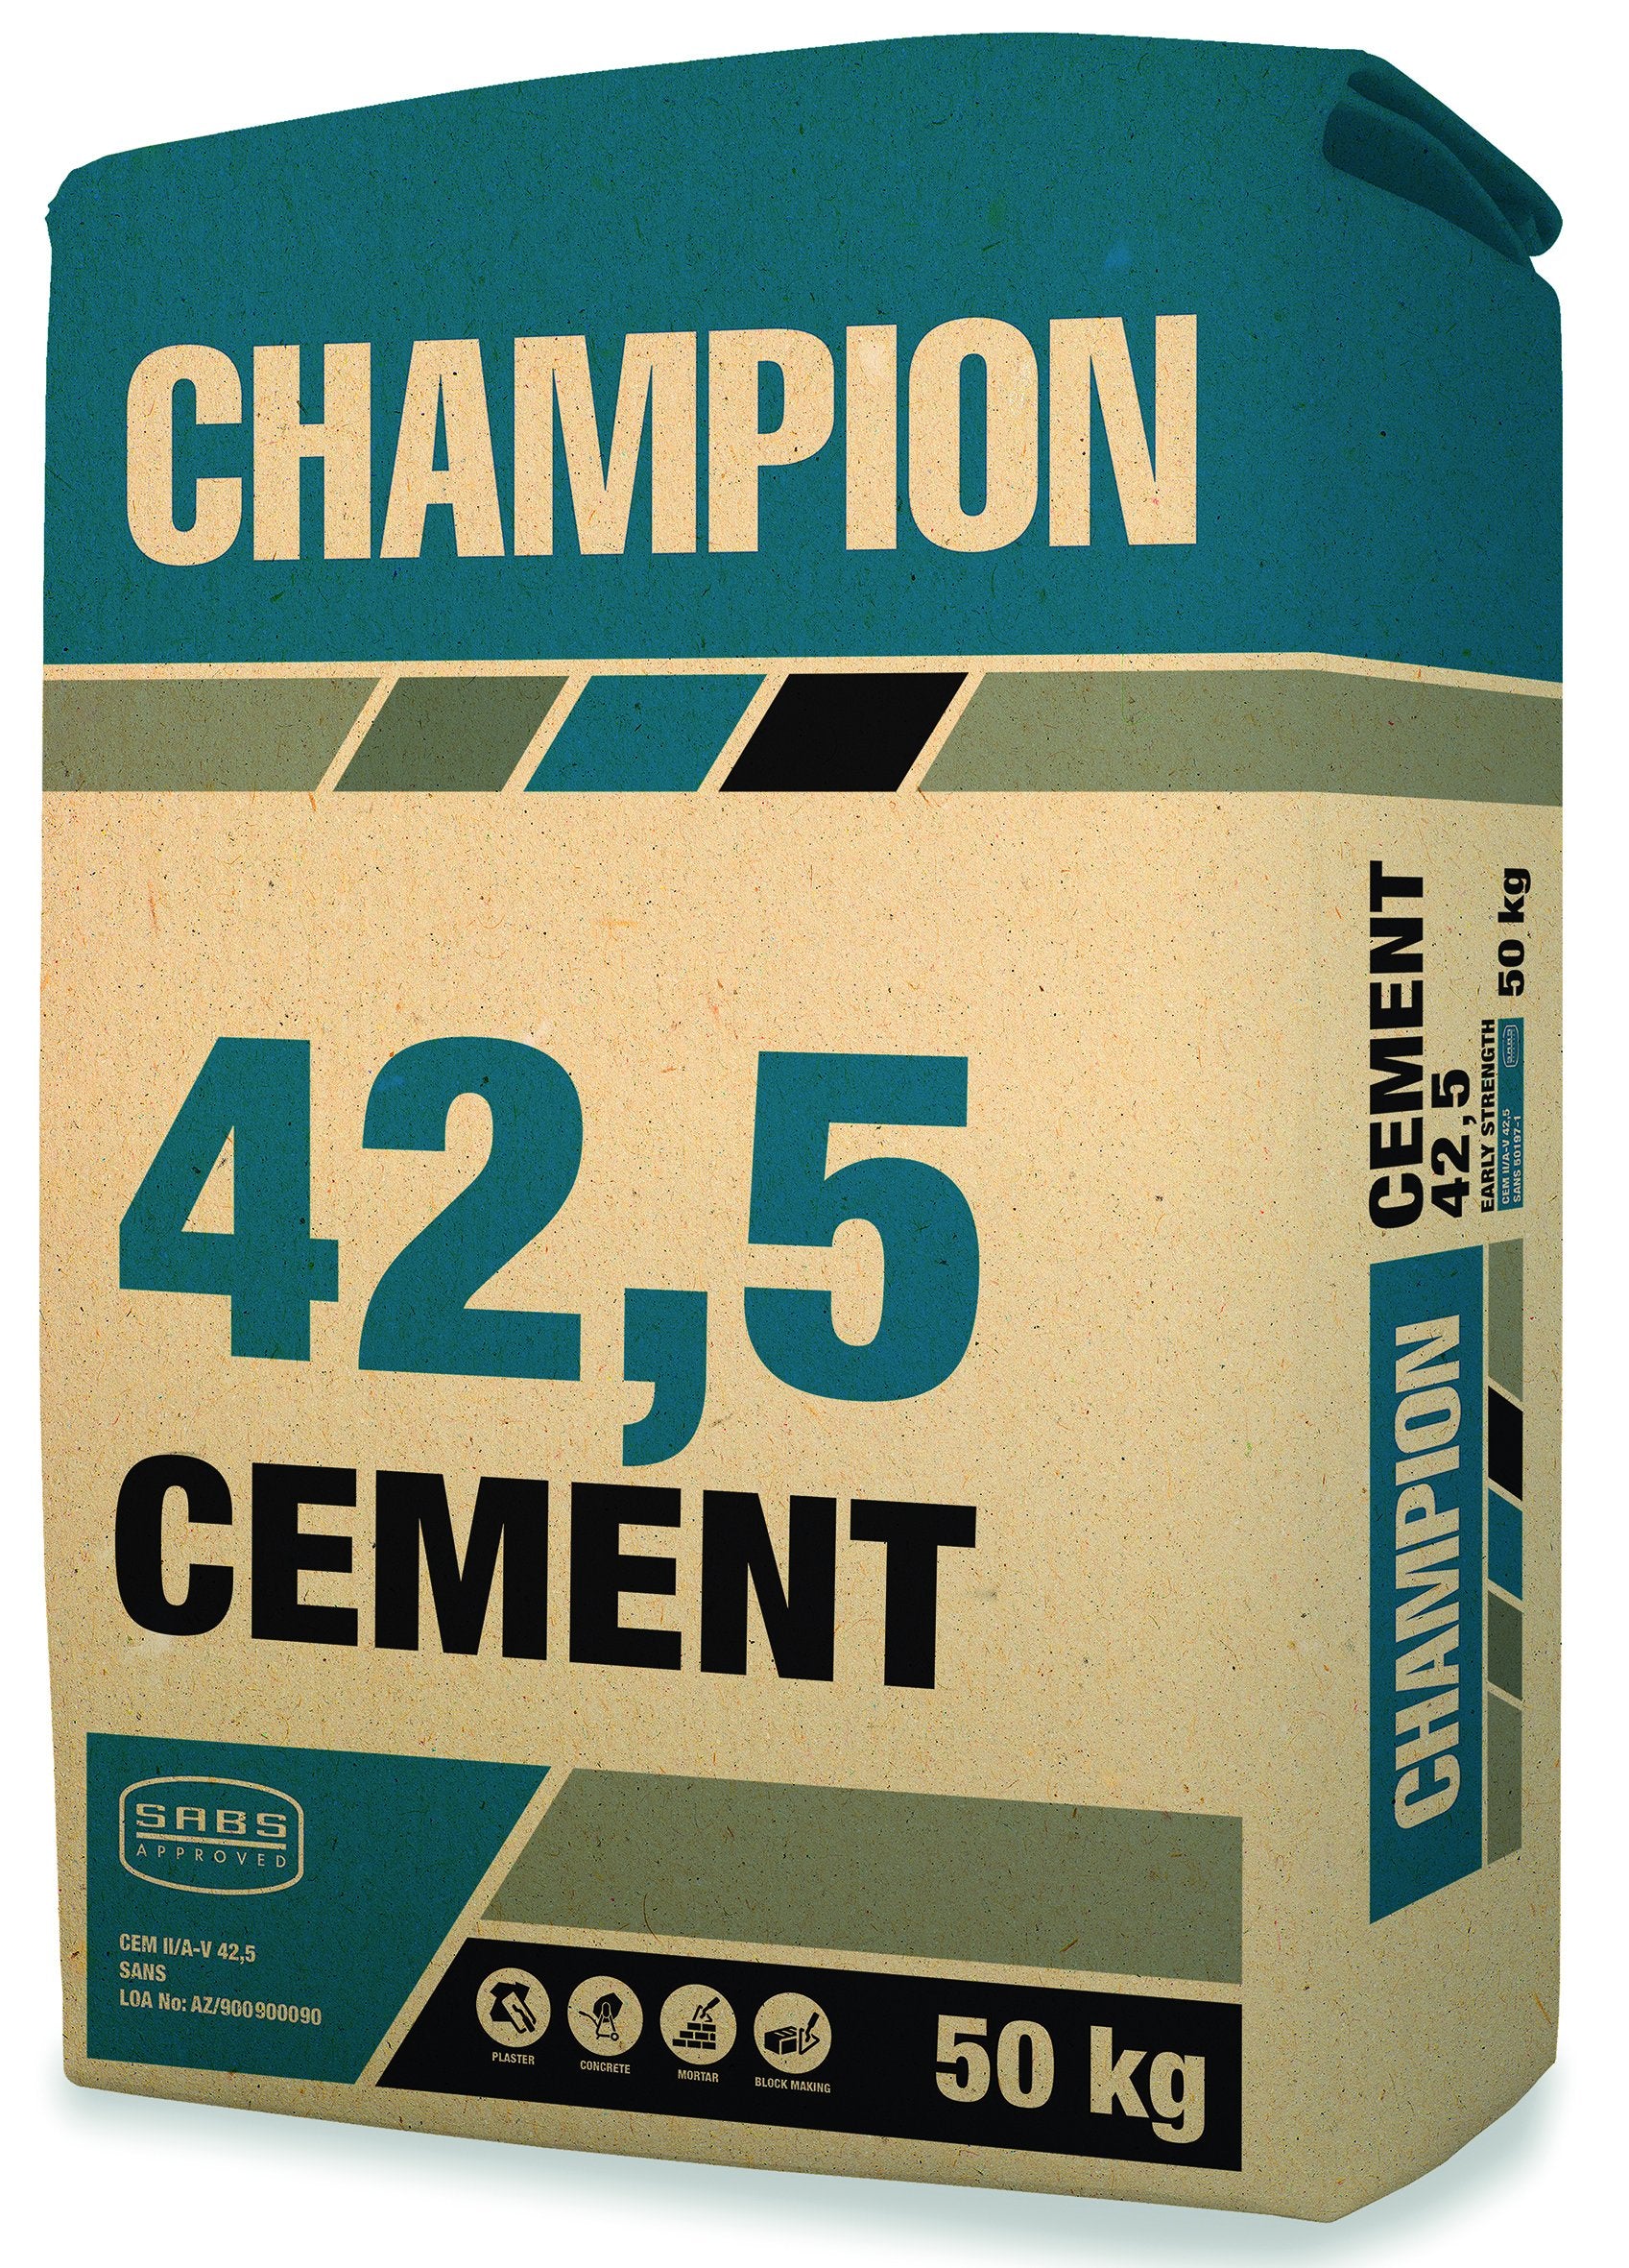 How Much Is A Bag Of Cement At Cashbuild - Bag Poster